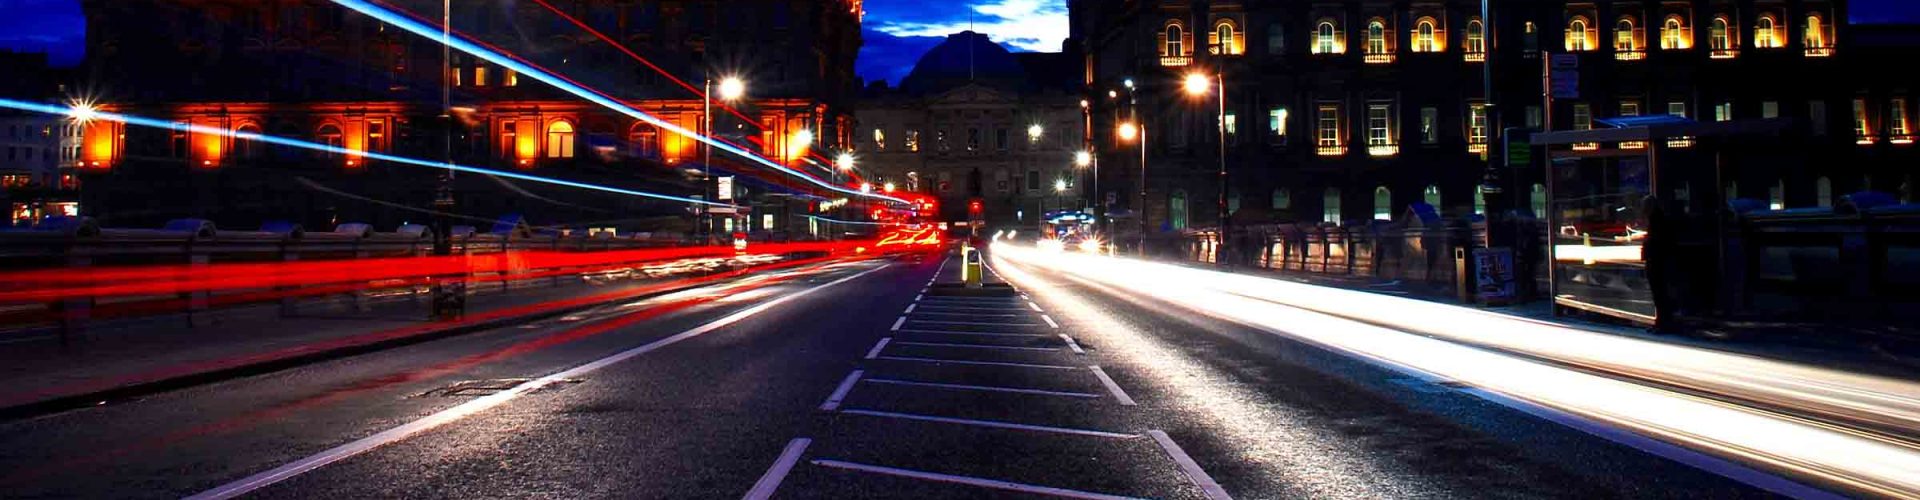 Edinburgh at night with lights from passing cars.